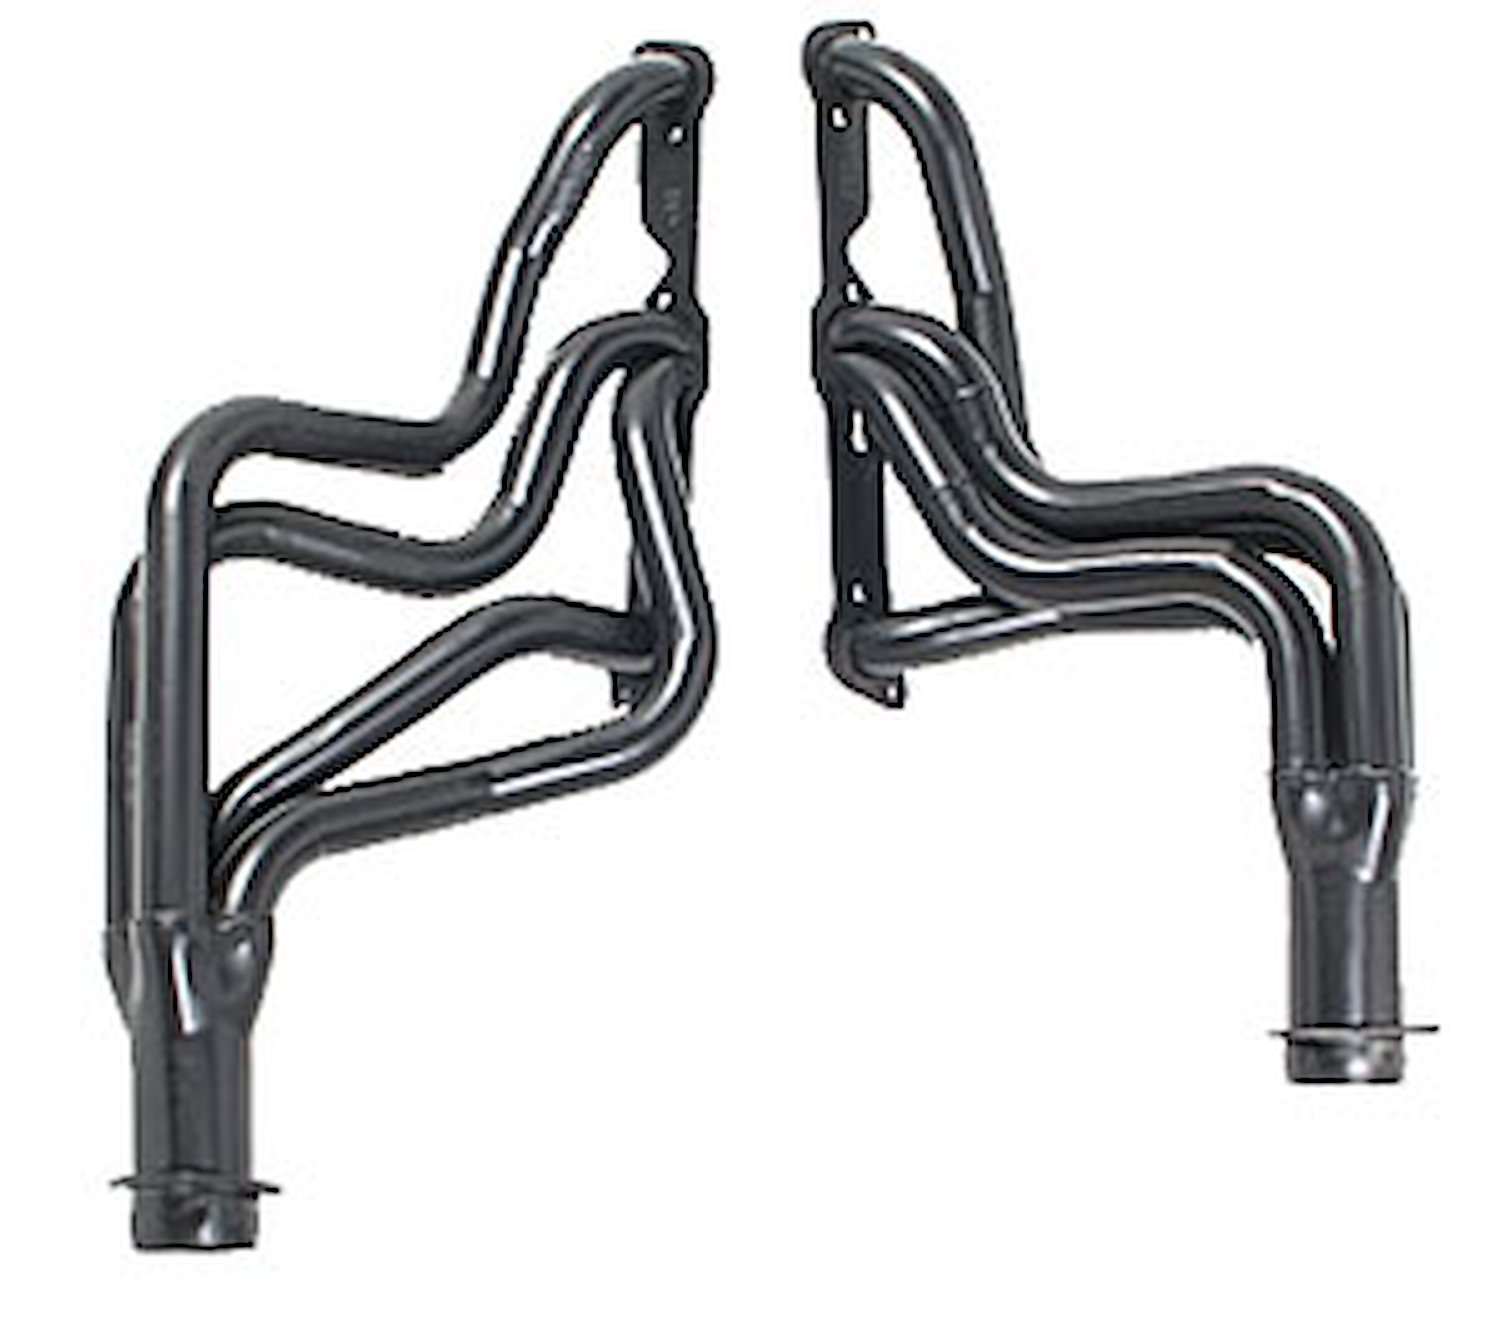 Standard Duty Uncoated Full Length Headers for 1964-72 Pontiac GTO/Le Mans/Tempest 326-455